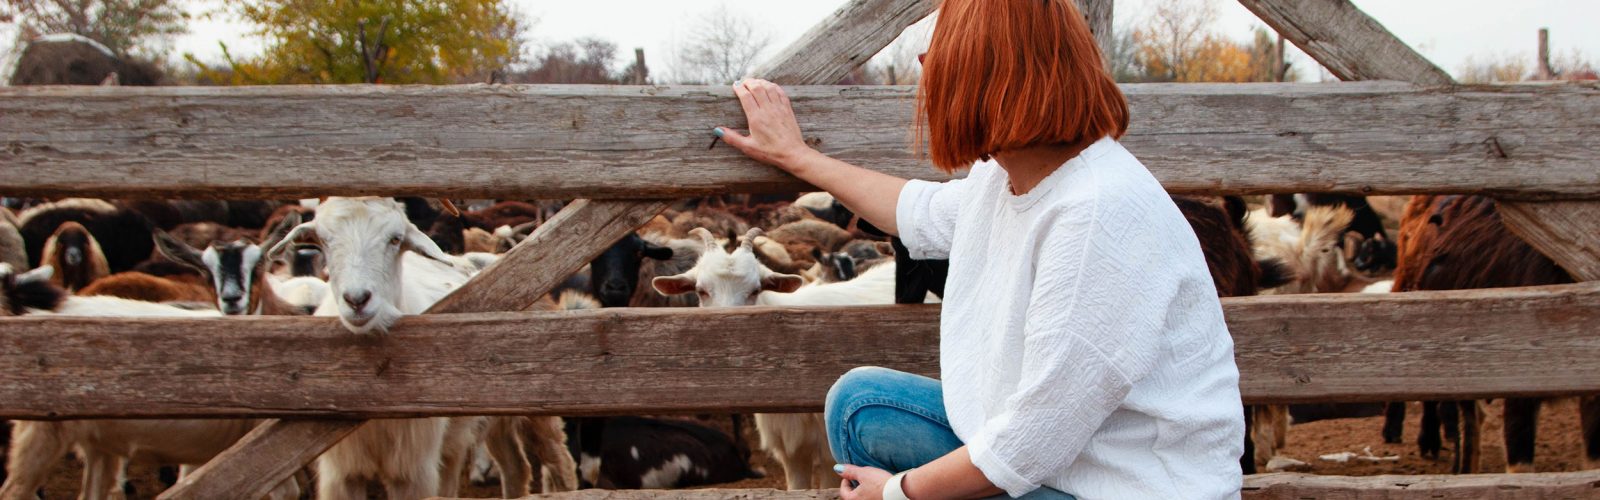 woman-kneeling-down-looking-at-goats